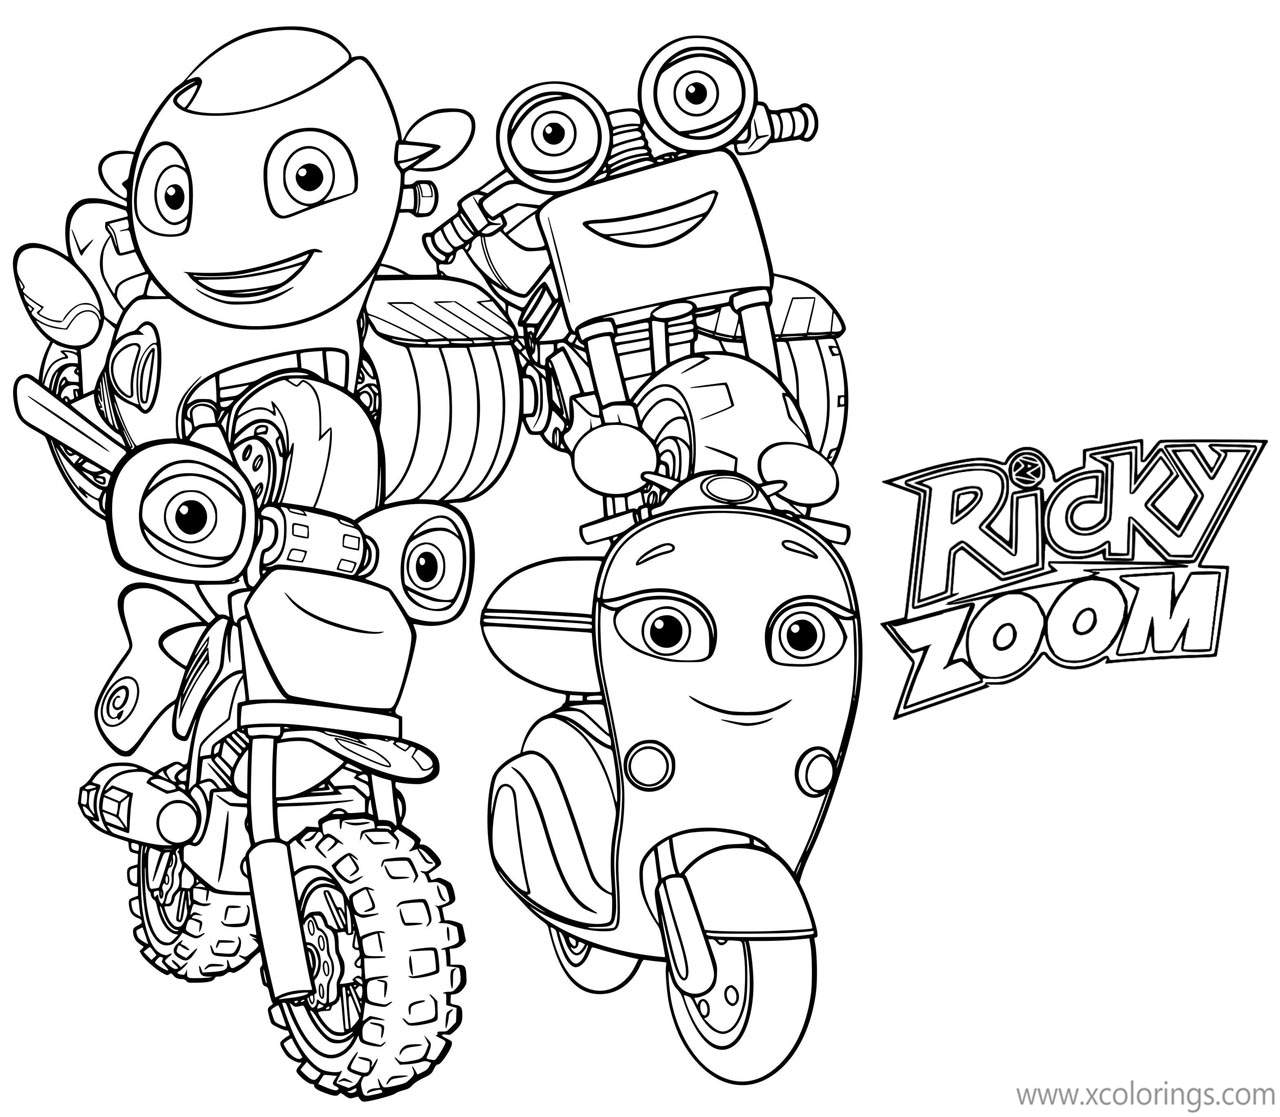 Free Ricky Zoom Coloring Pages Characters printable